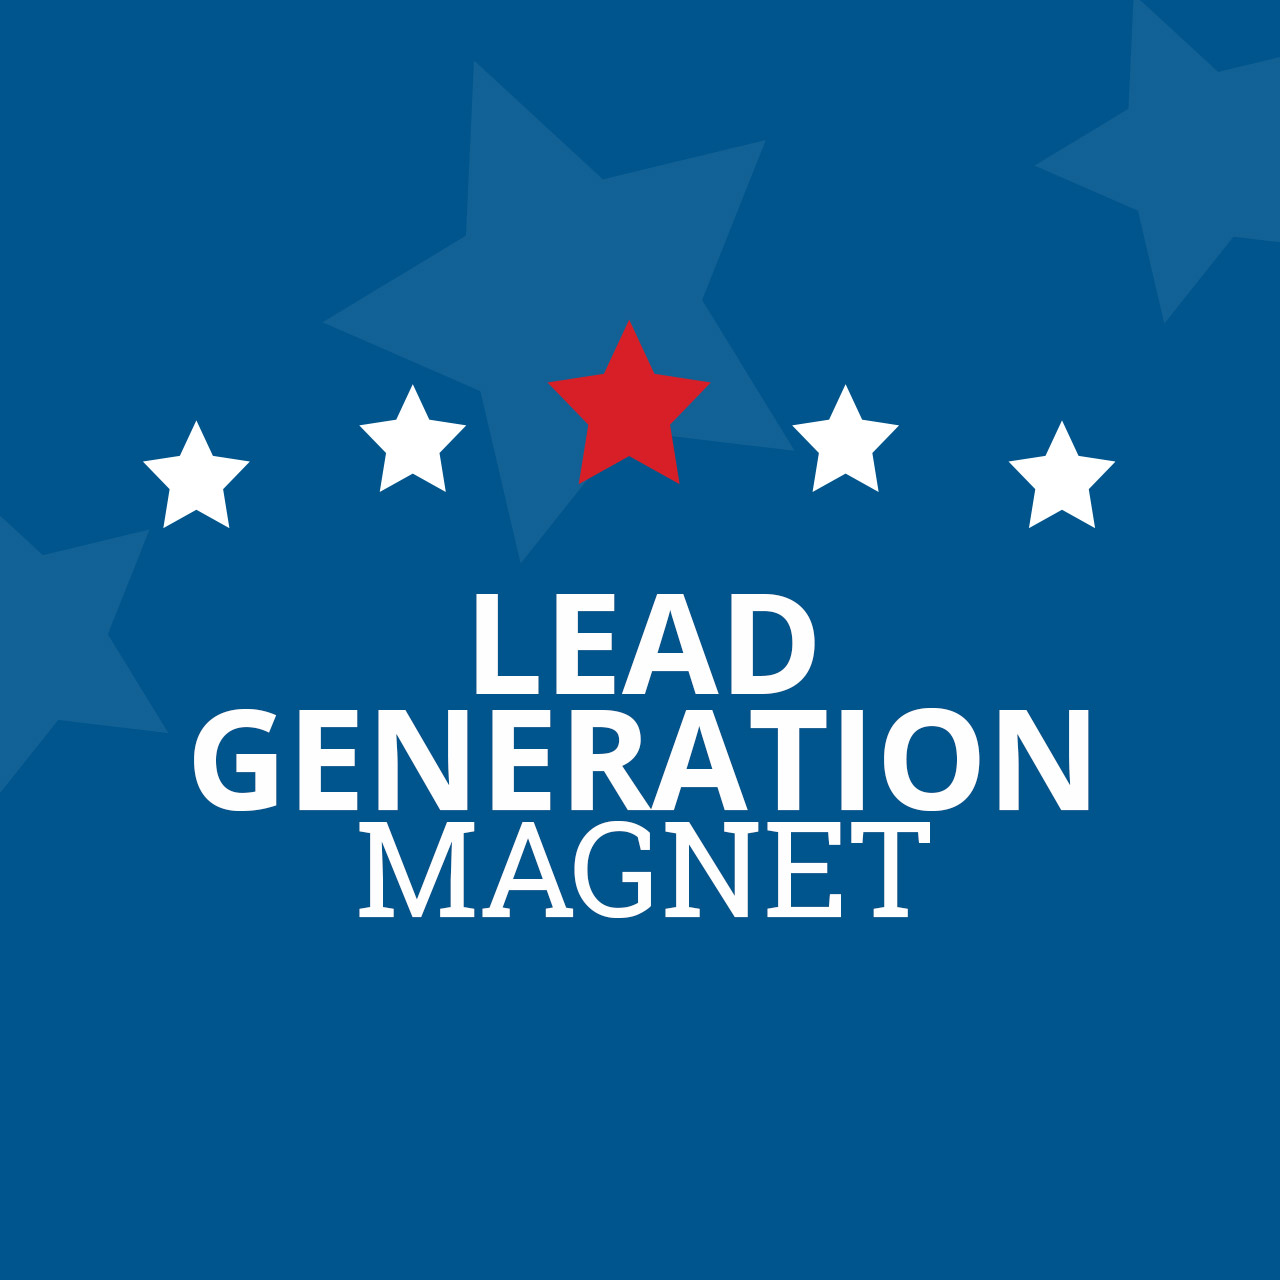 Featured image for “Lead Generation Magnet”